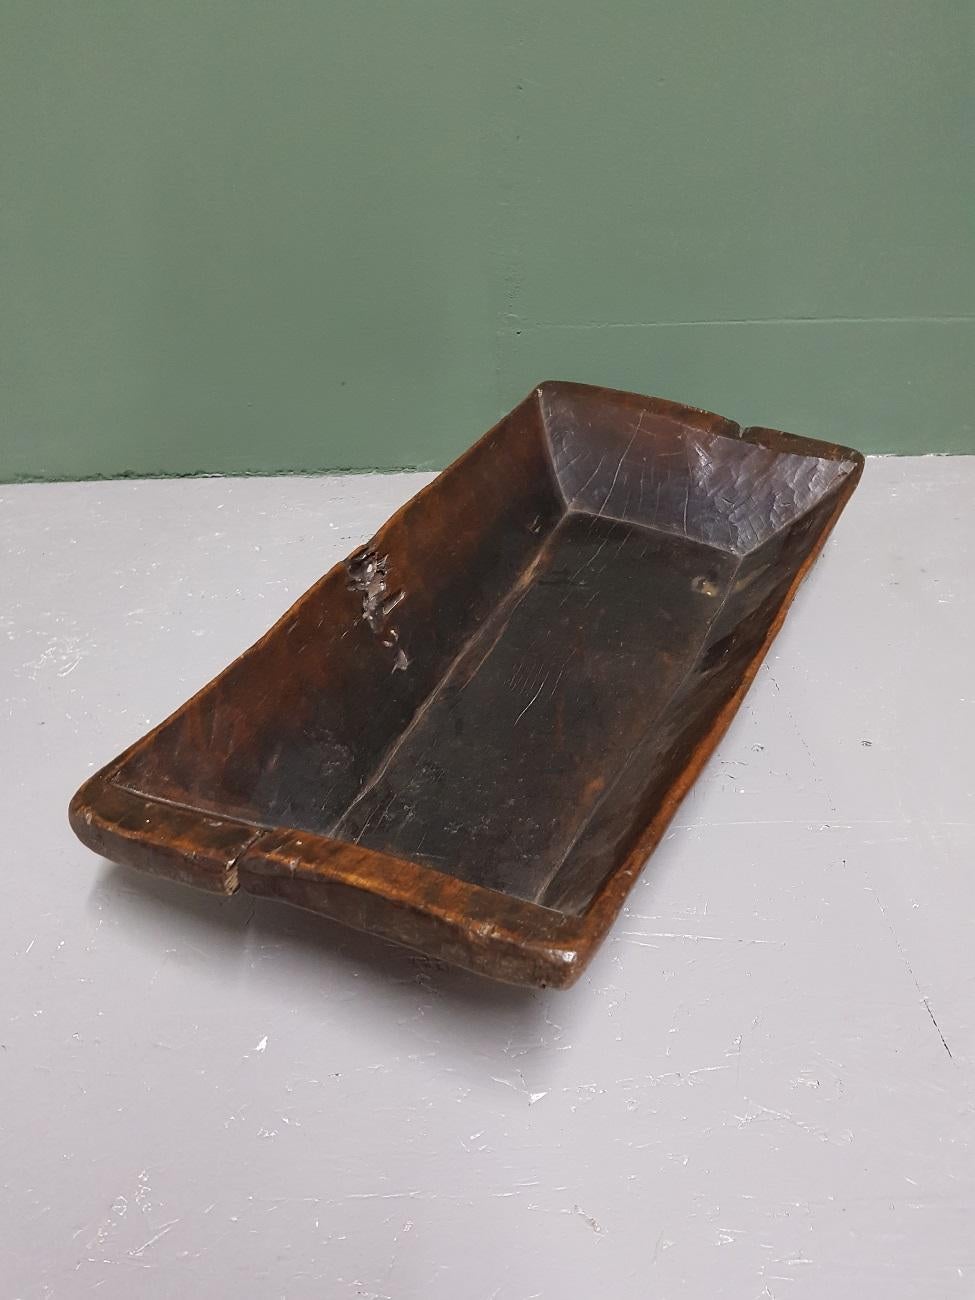 Hand-Crafted 19th Century Hand-Cut Wooden Trough